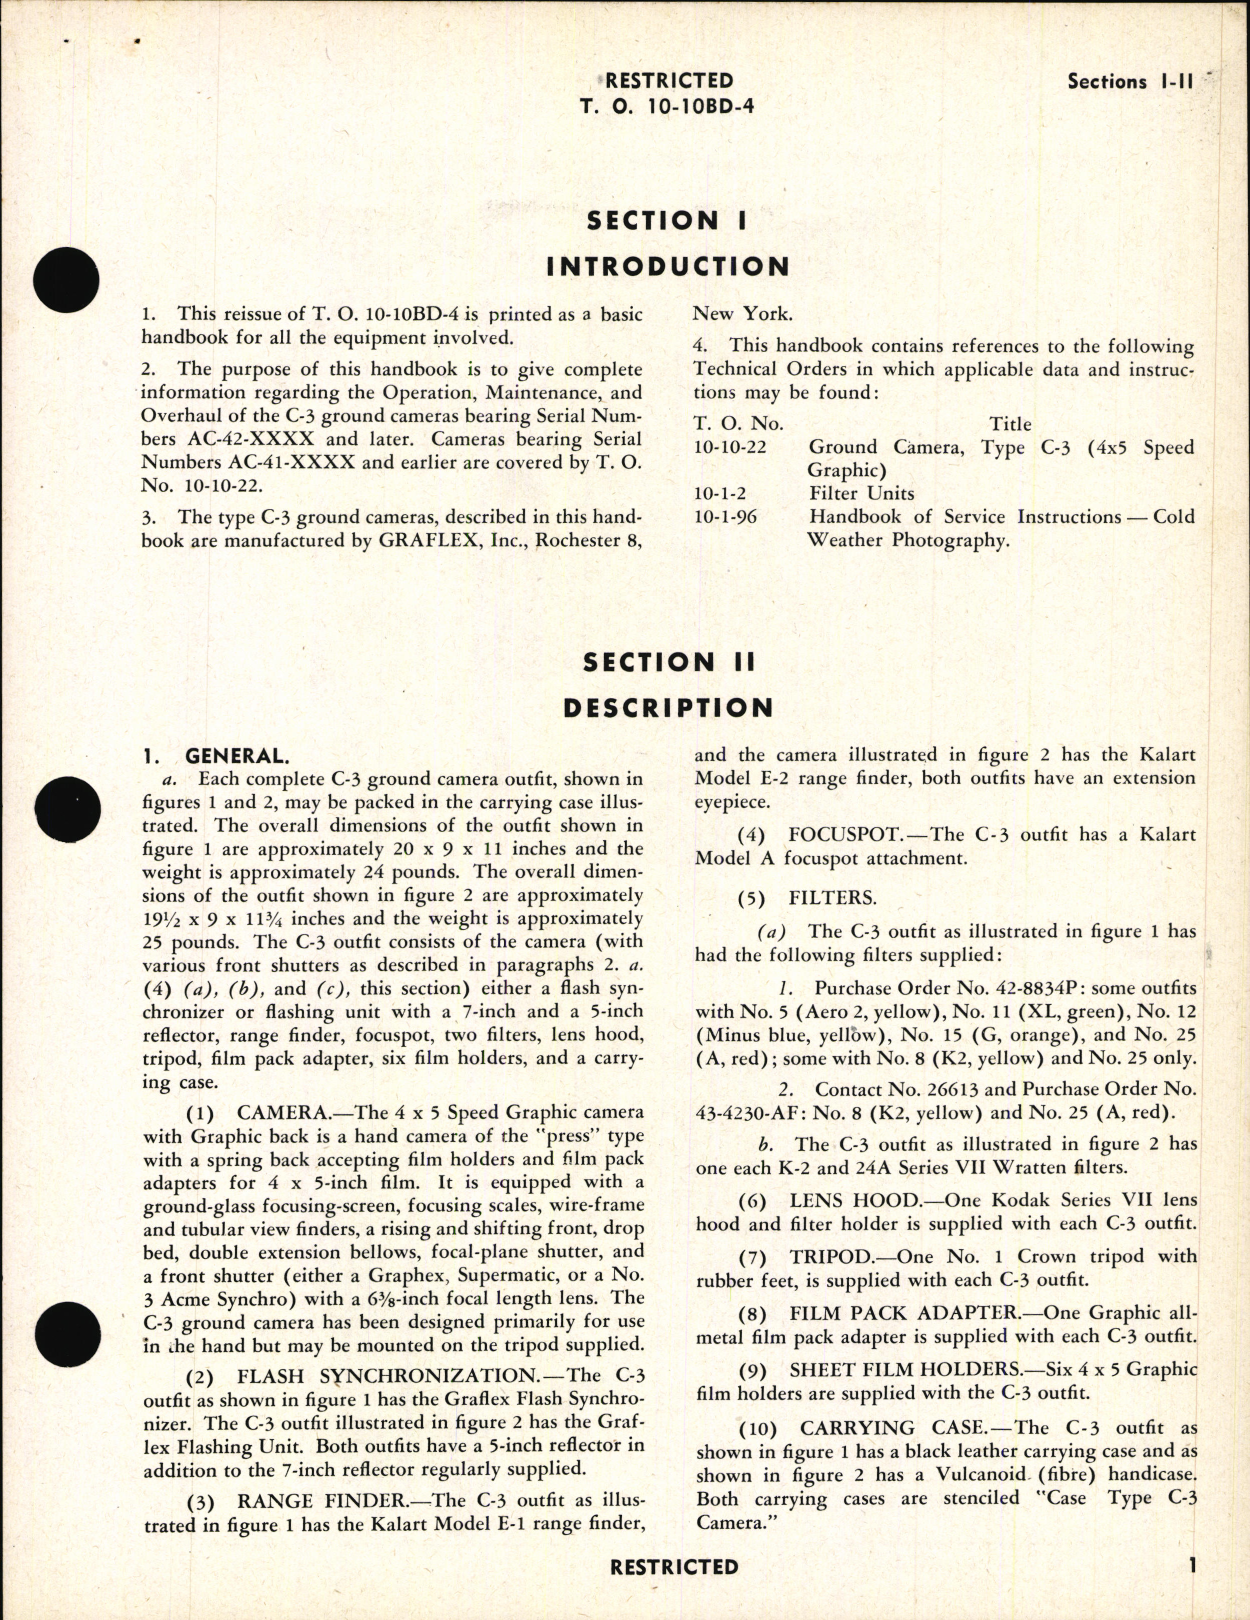 Sample page 5 from AirCorps Library document: Operation, Service, & Overhaul Instructions with Parts Catalog for Ground Camera Type C-3